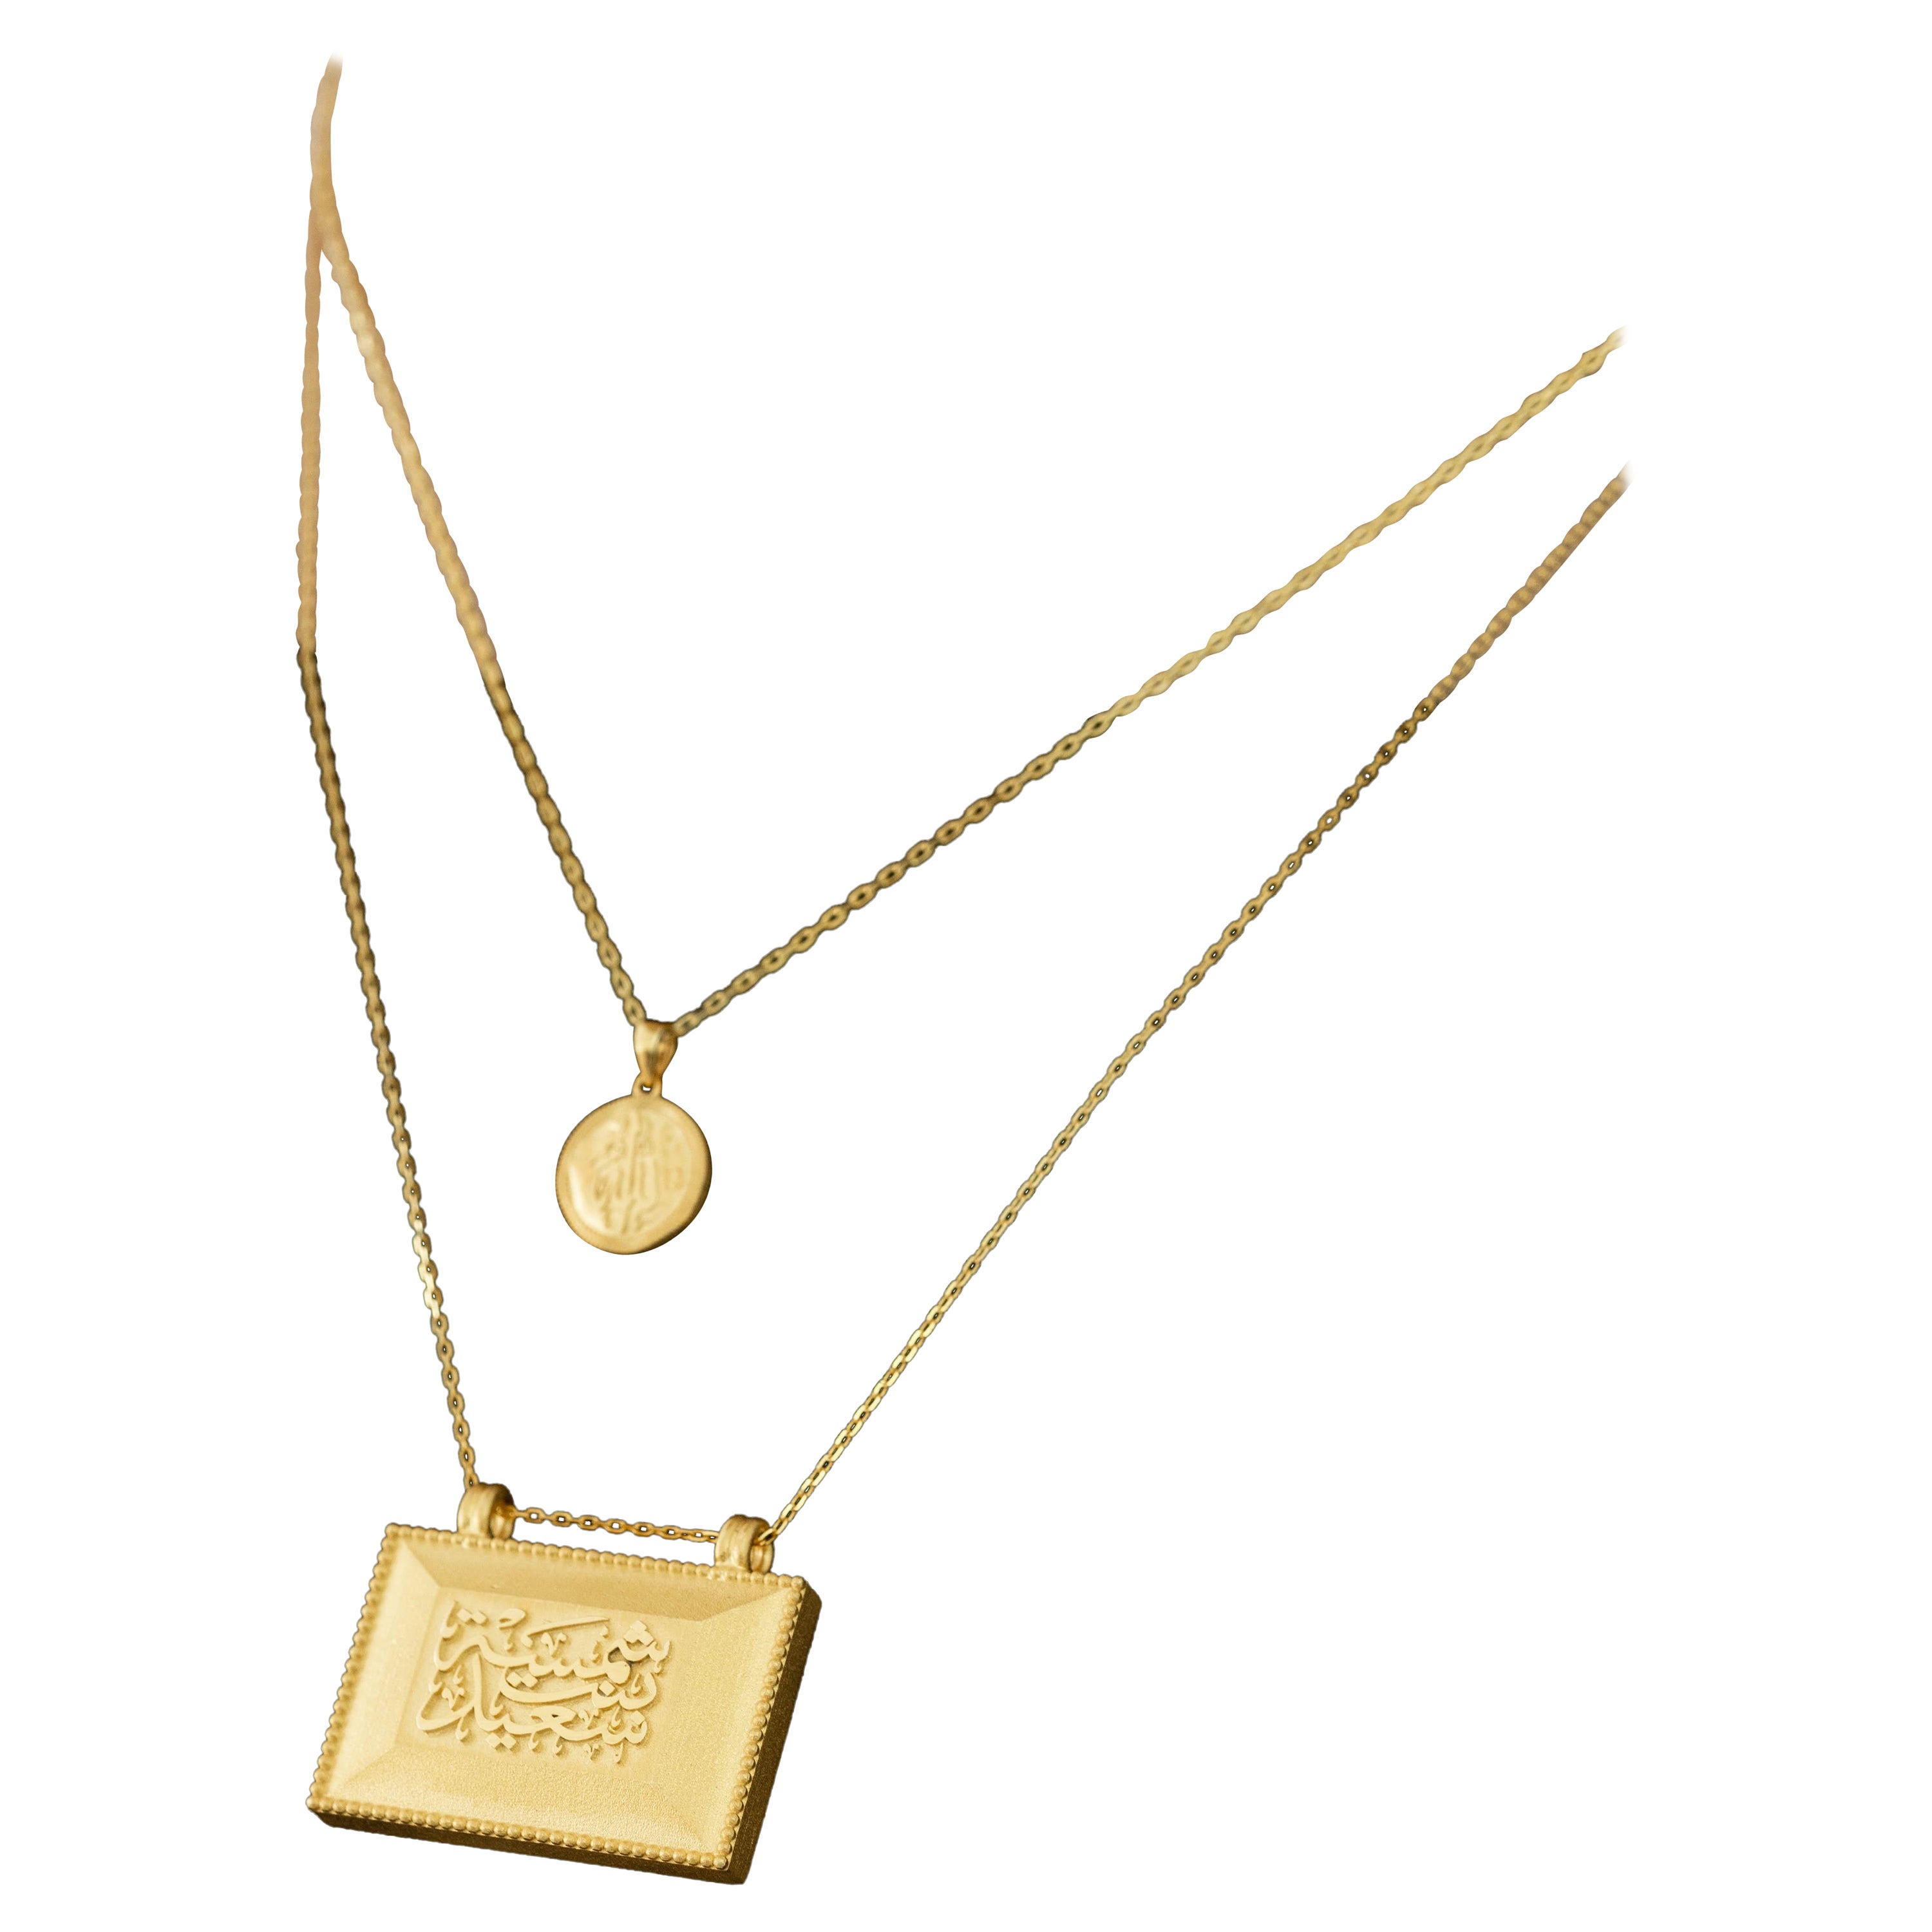  Allah 18k yellow gold chain Necklace. For Sale